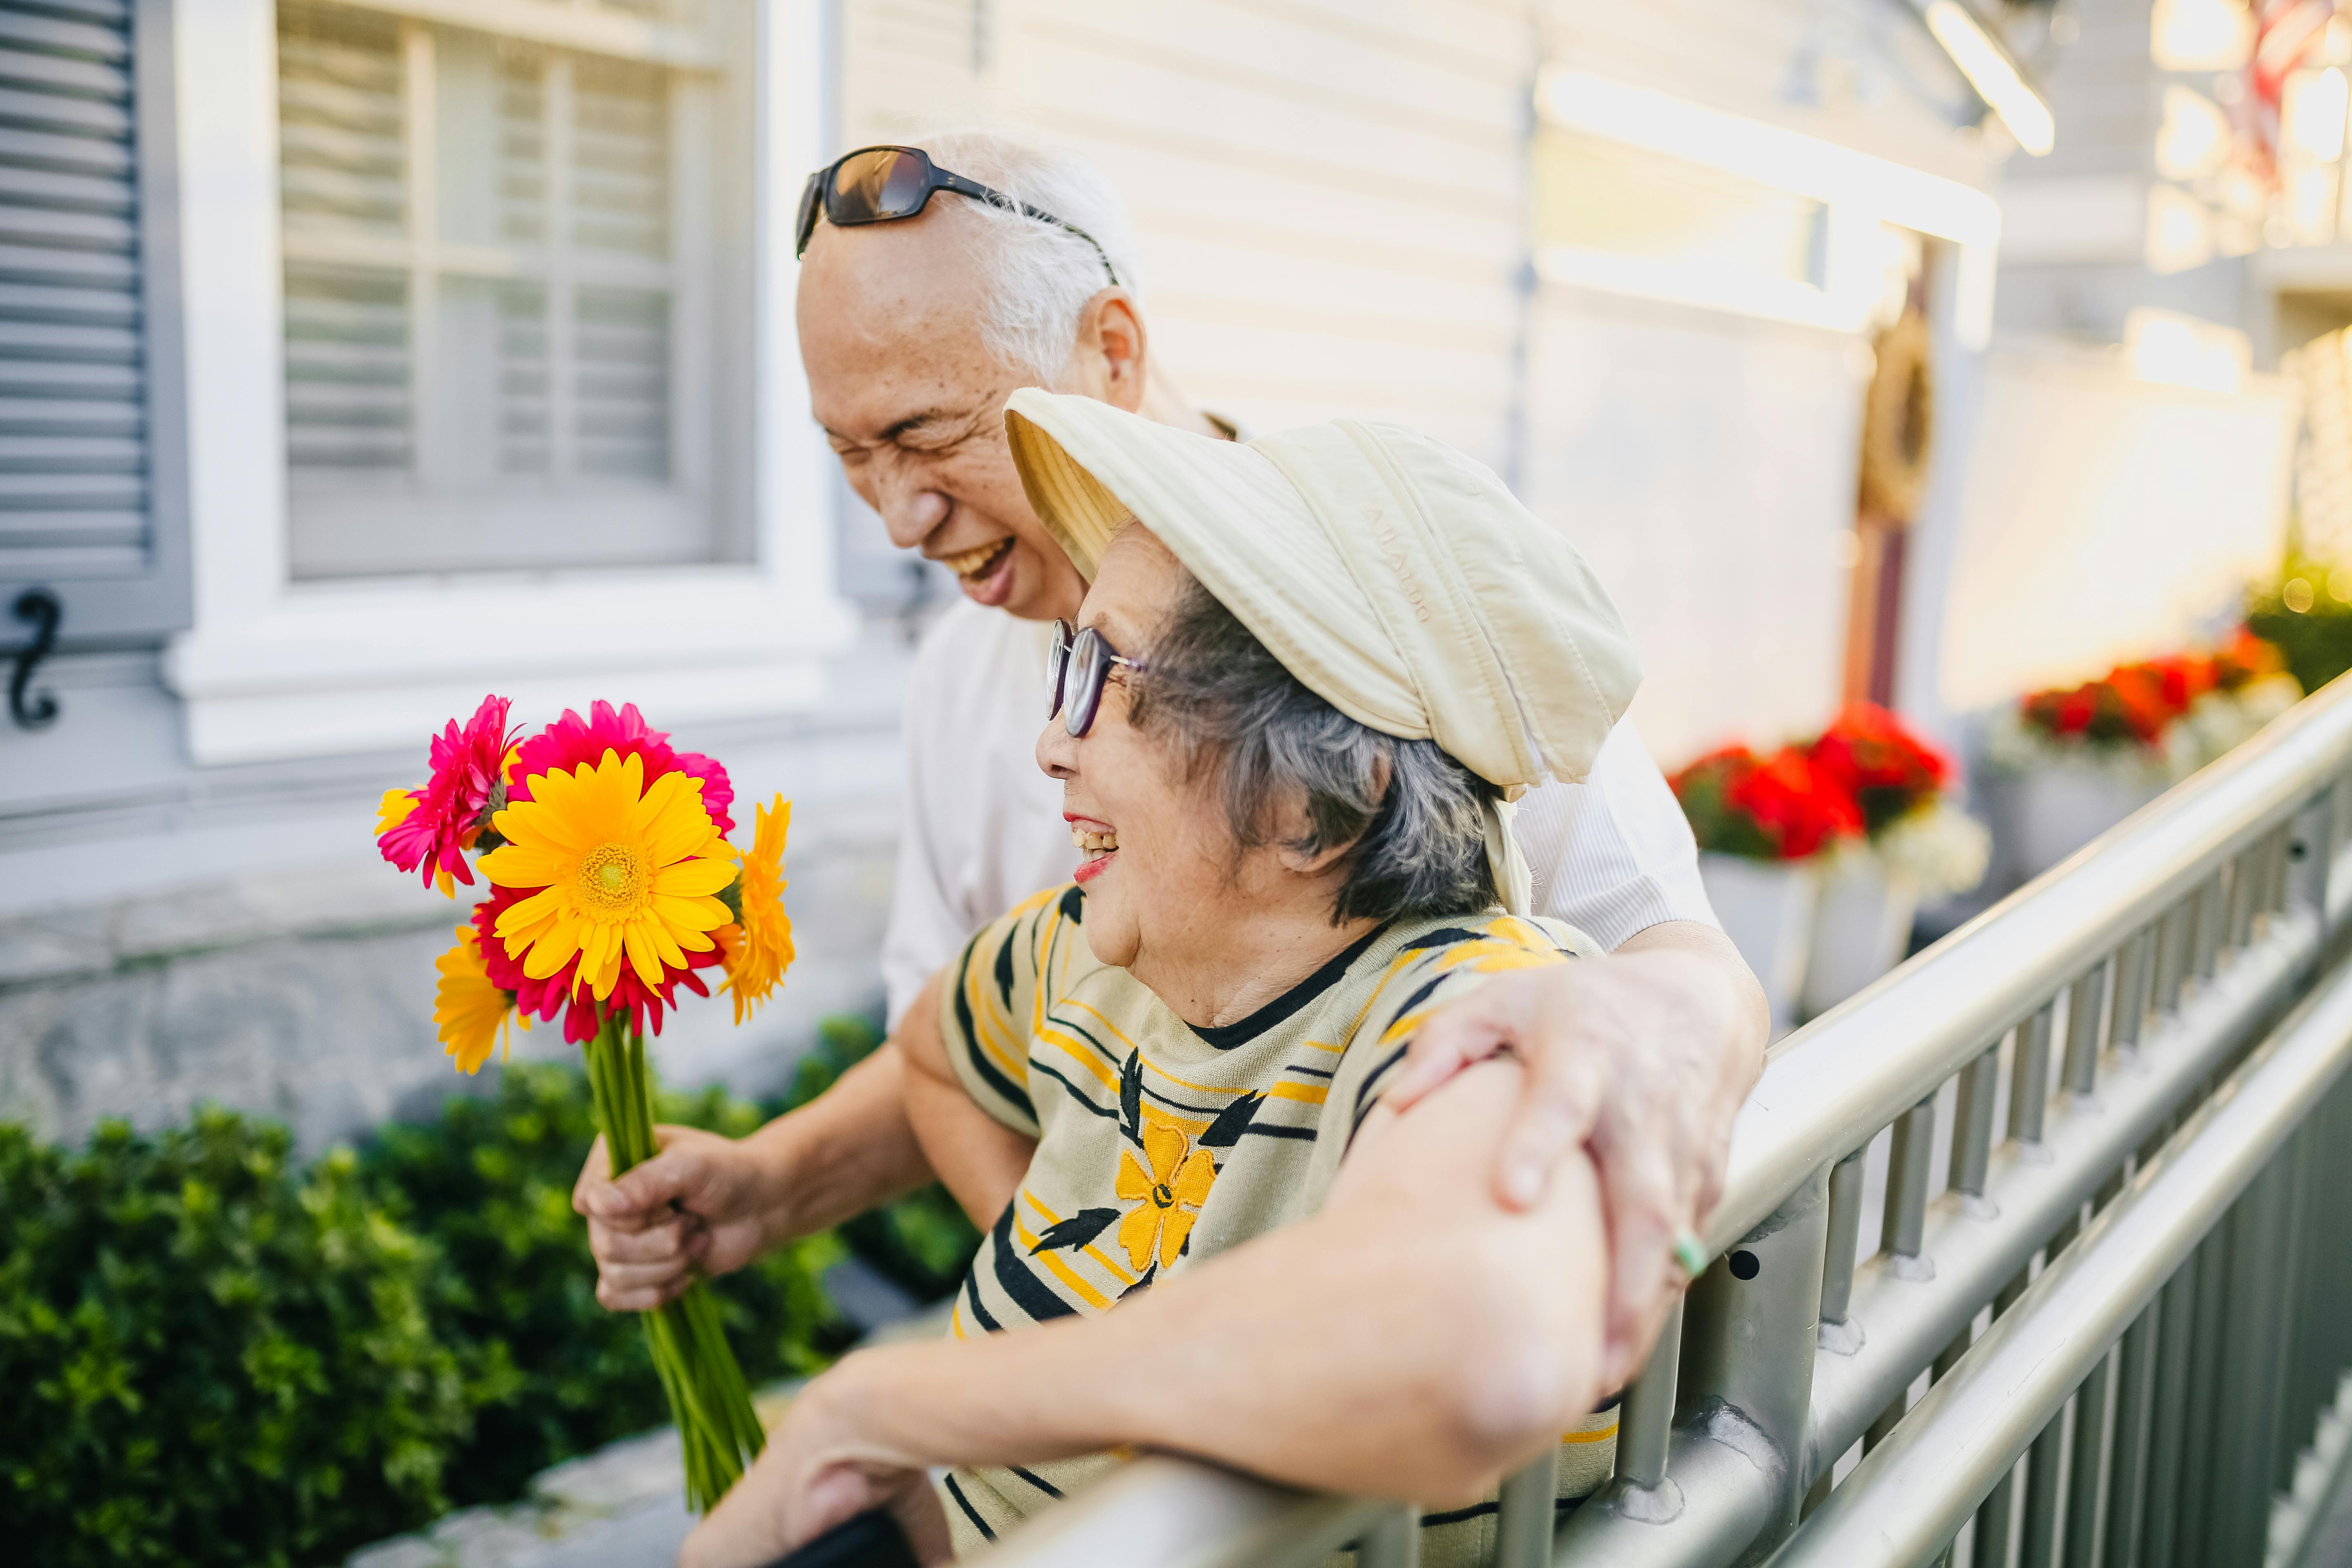 Senior man giving flowers to his wife | Source: Pexels